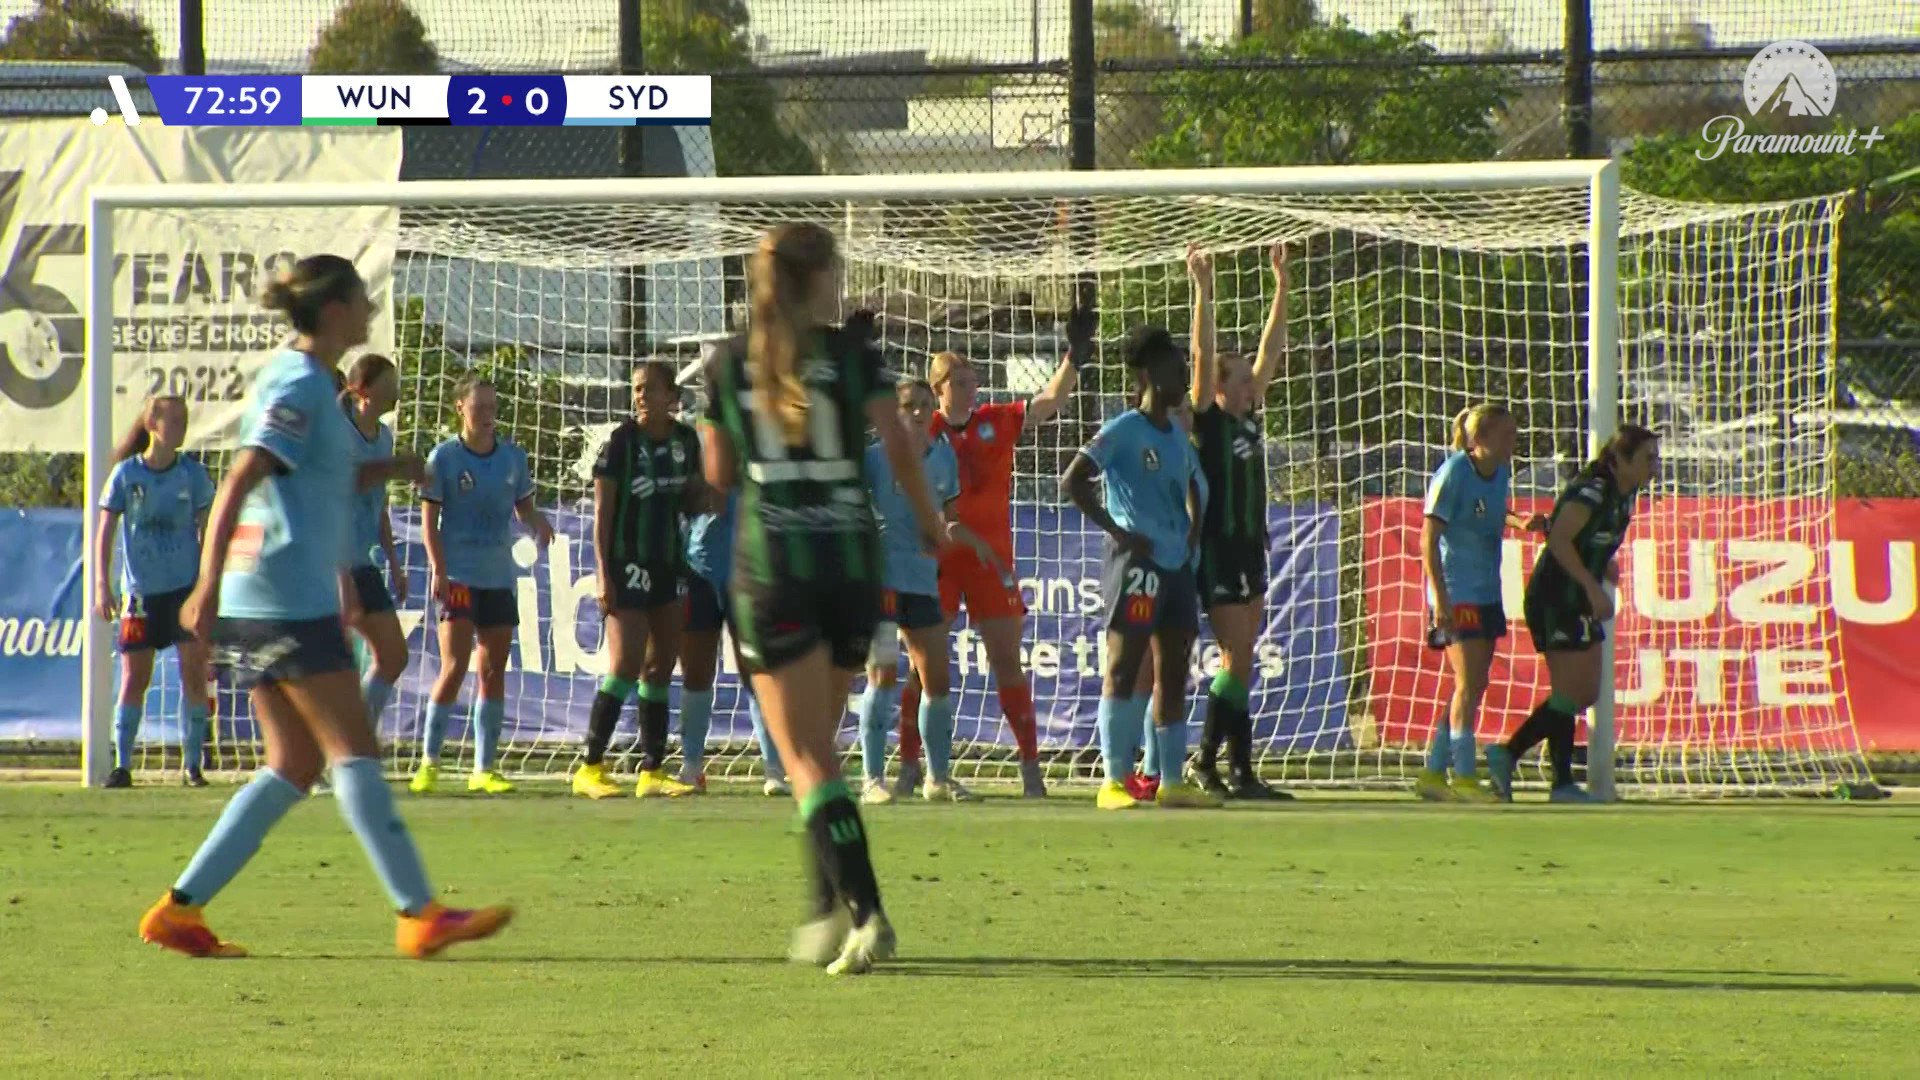 𝘾𝙤𝙪𝙡𝙙𝙣'𝙩 𝙜𝙚𝙩 𝙖𝙣𝙮 𝙘𝙡𝙤𝙨𝙚𝙧 ! 😱

@wufcofficial almost make it three but are denied after a goalmouth scramble ❌

Catch all the action LIVE on @Channel10AU PLAY 📺

Follow LIVE:  #WeAreALeagues”